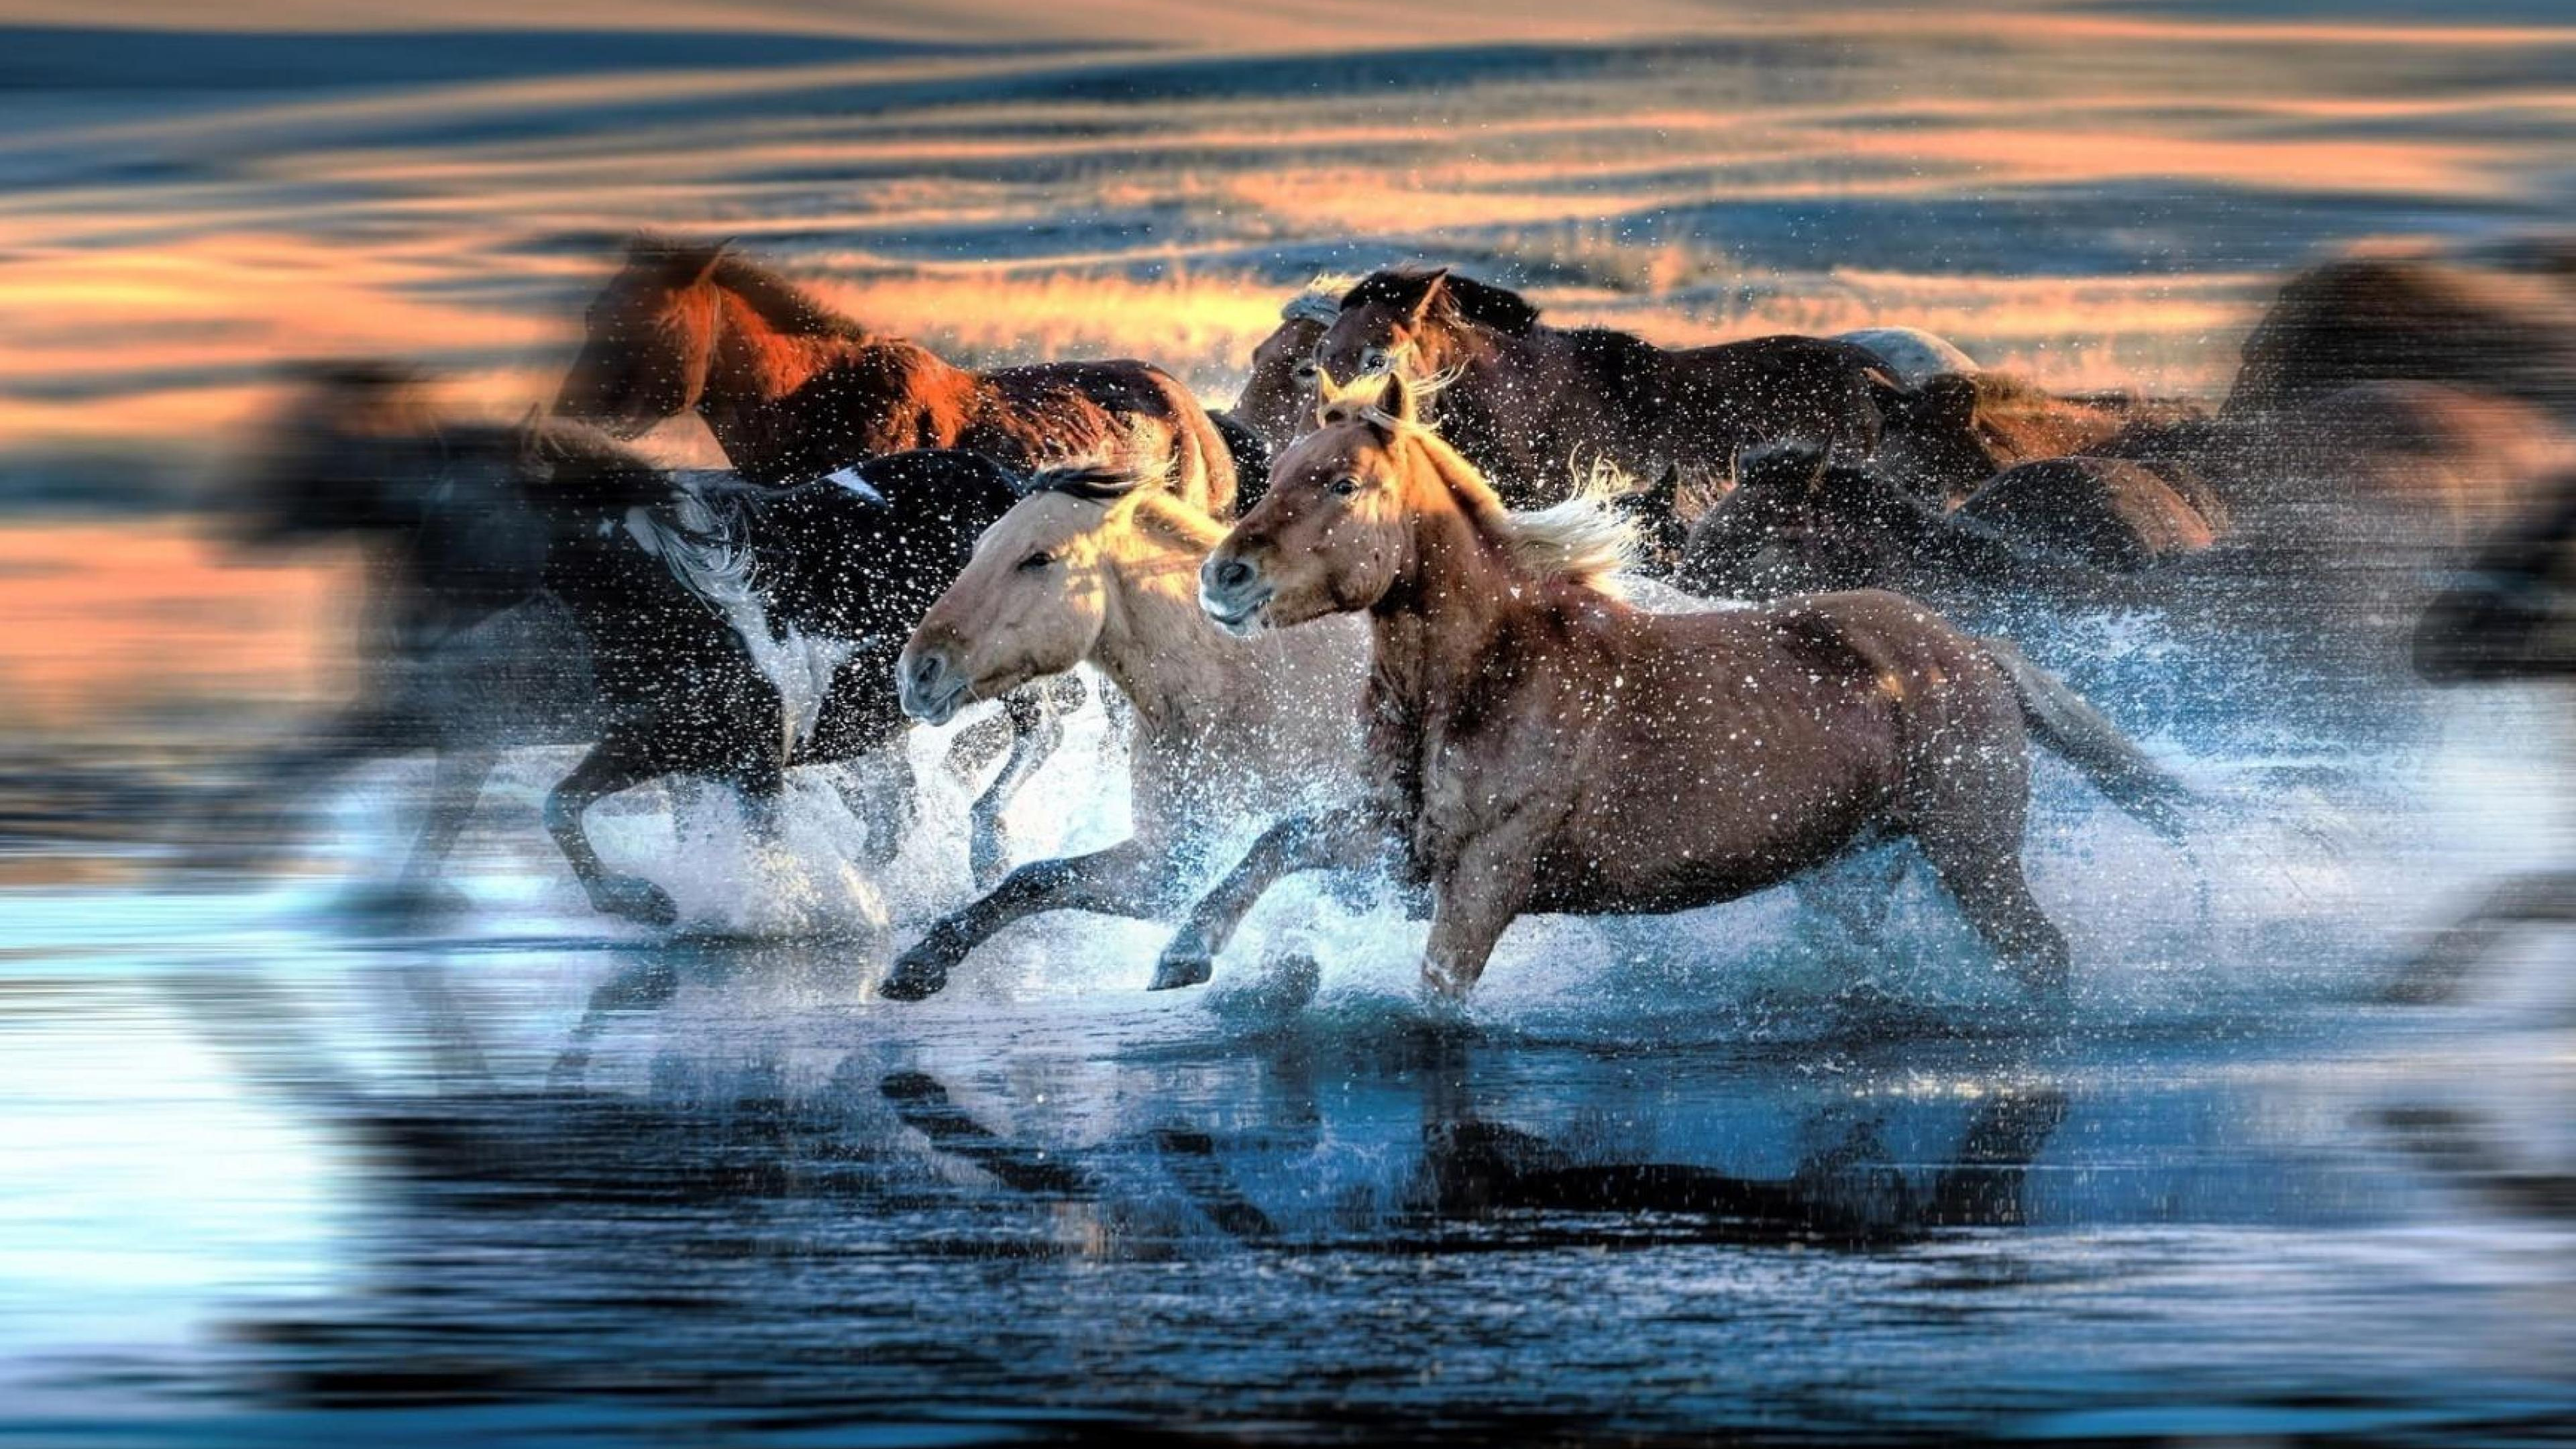 Brown and White Horse Running on Water During Daytime. Wallpaper in 3840x2160 Resolution